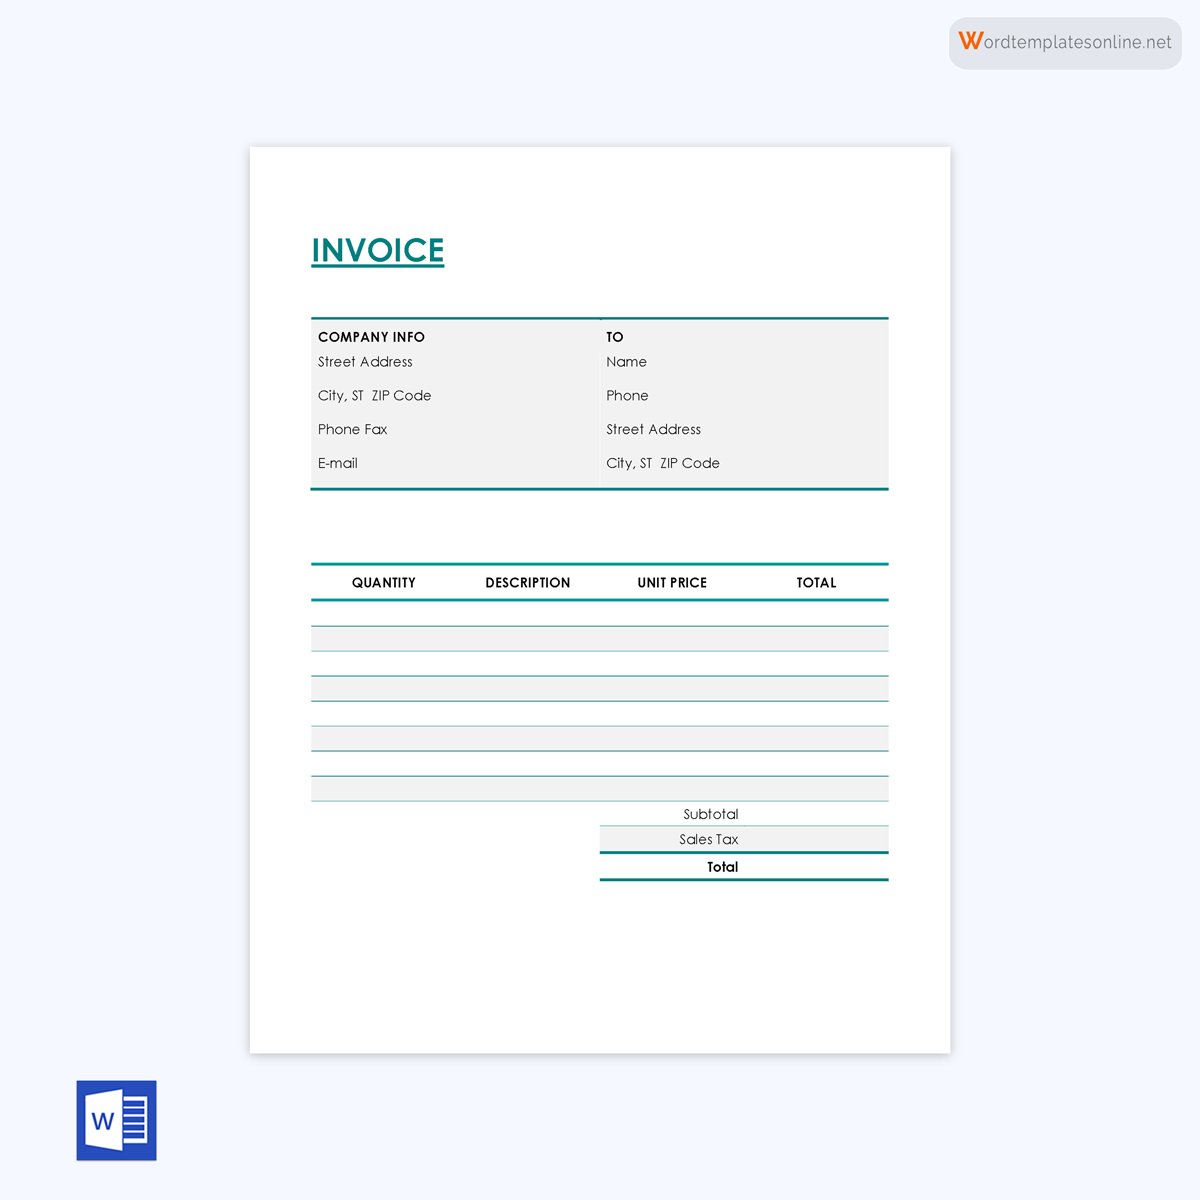 Free invoice form sample for easy customization